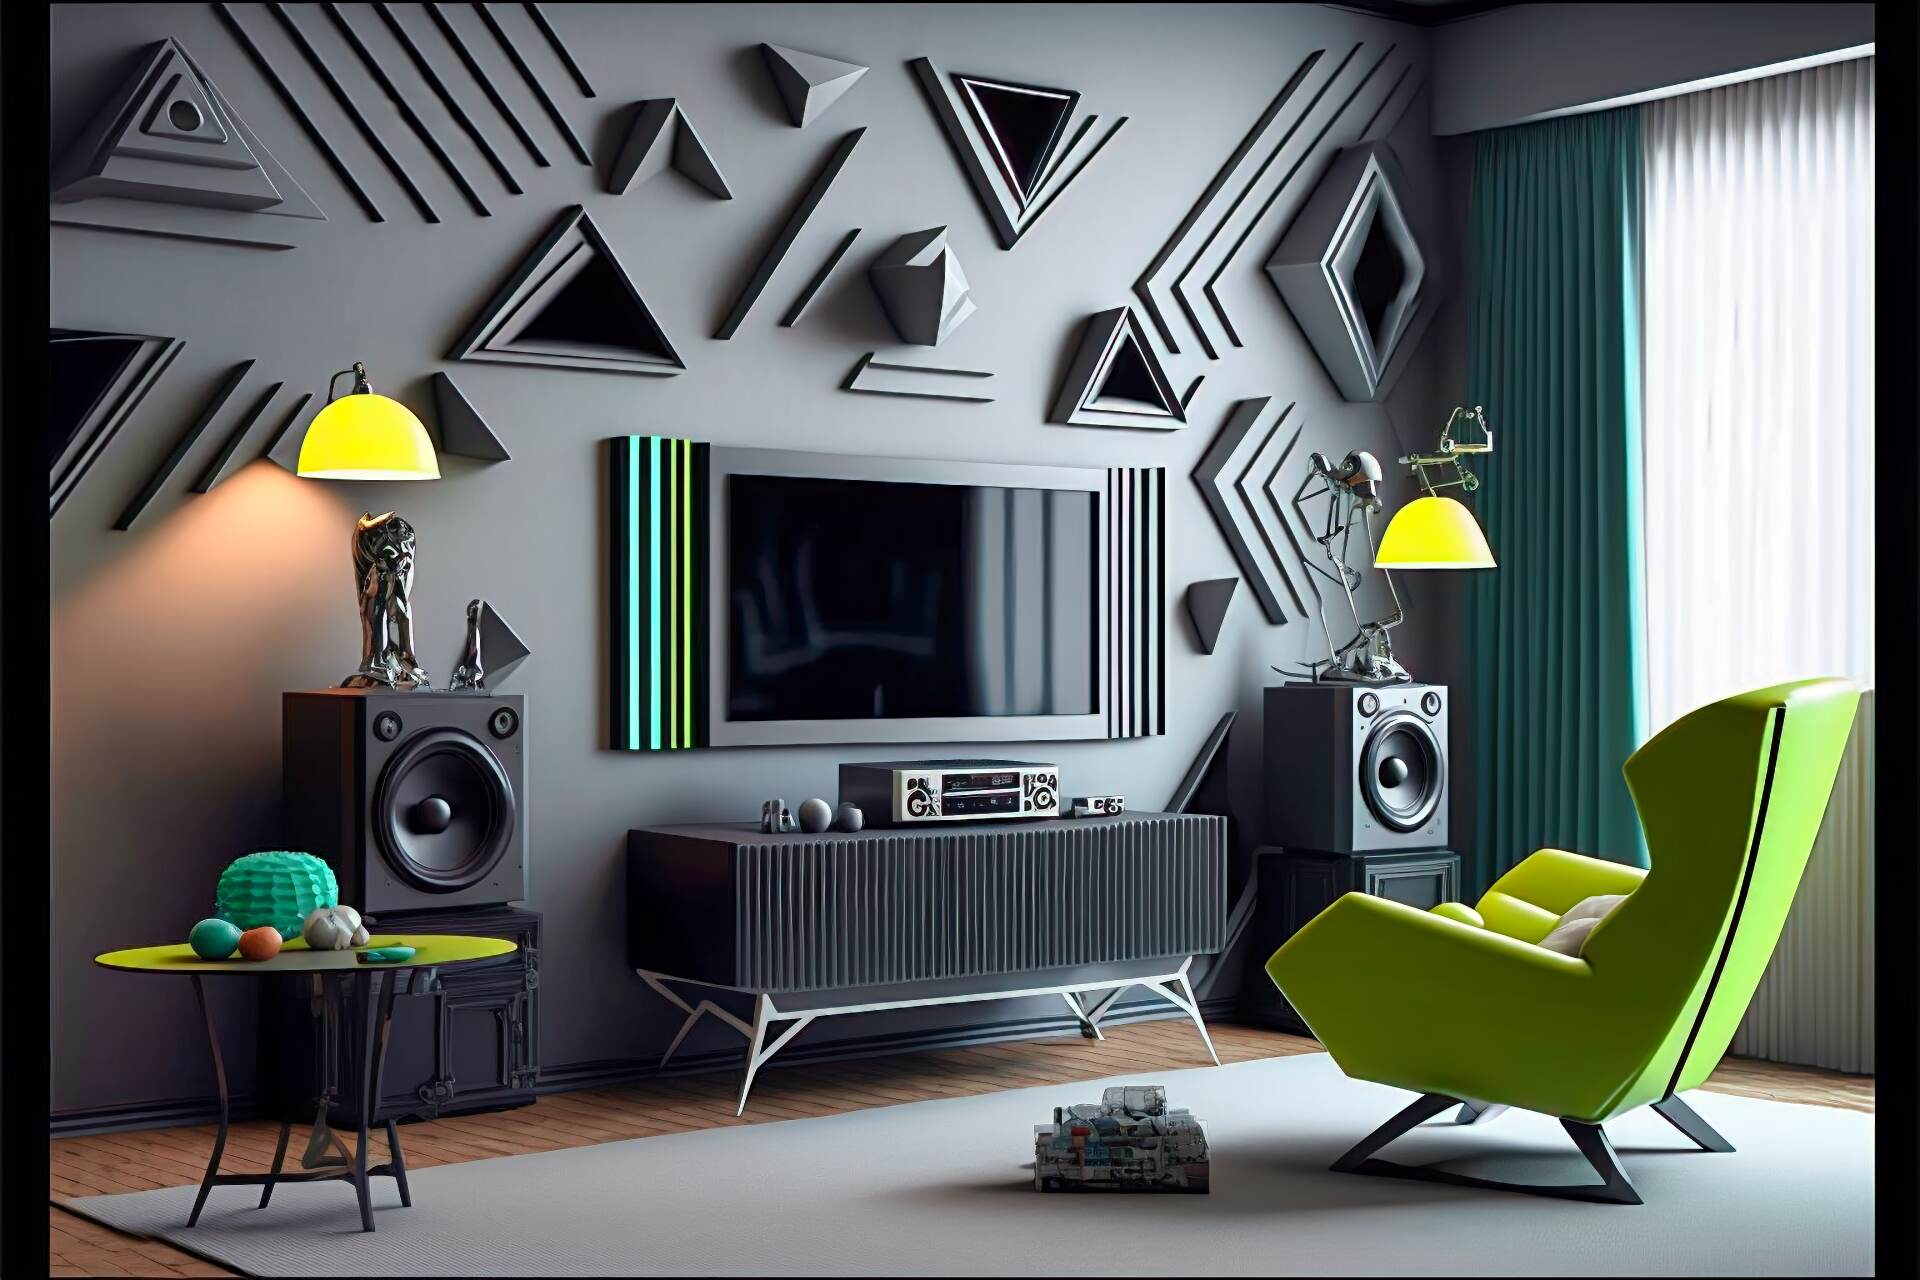 A Cyberpunk-Style Living Room With A Retro-Futuristic Feel. The Walls Are Painted A Cool Gray And Adorned With Vintage-Inspired Neon Lights In Various Shapes And Colors. The Furniture Is Made Up Of Angular And Geometric Pieces In A Monochromatic Color Scheme Of Black And Silver. A Large Flat Screen Tv Is Mounted On The Wall, Surrounded By More Neon Lights. A High-Tech Sound System And A Vintage-Inspired Gaming Console Complete The Look.